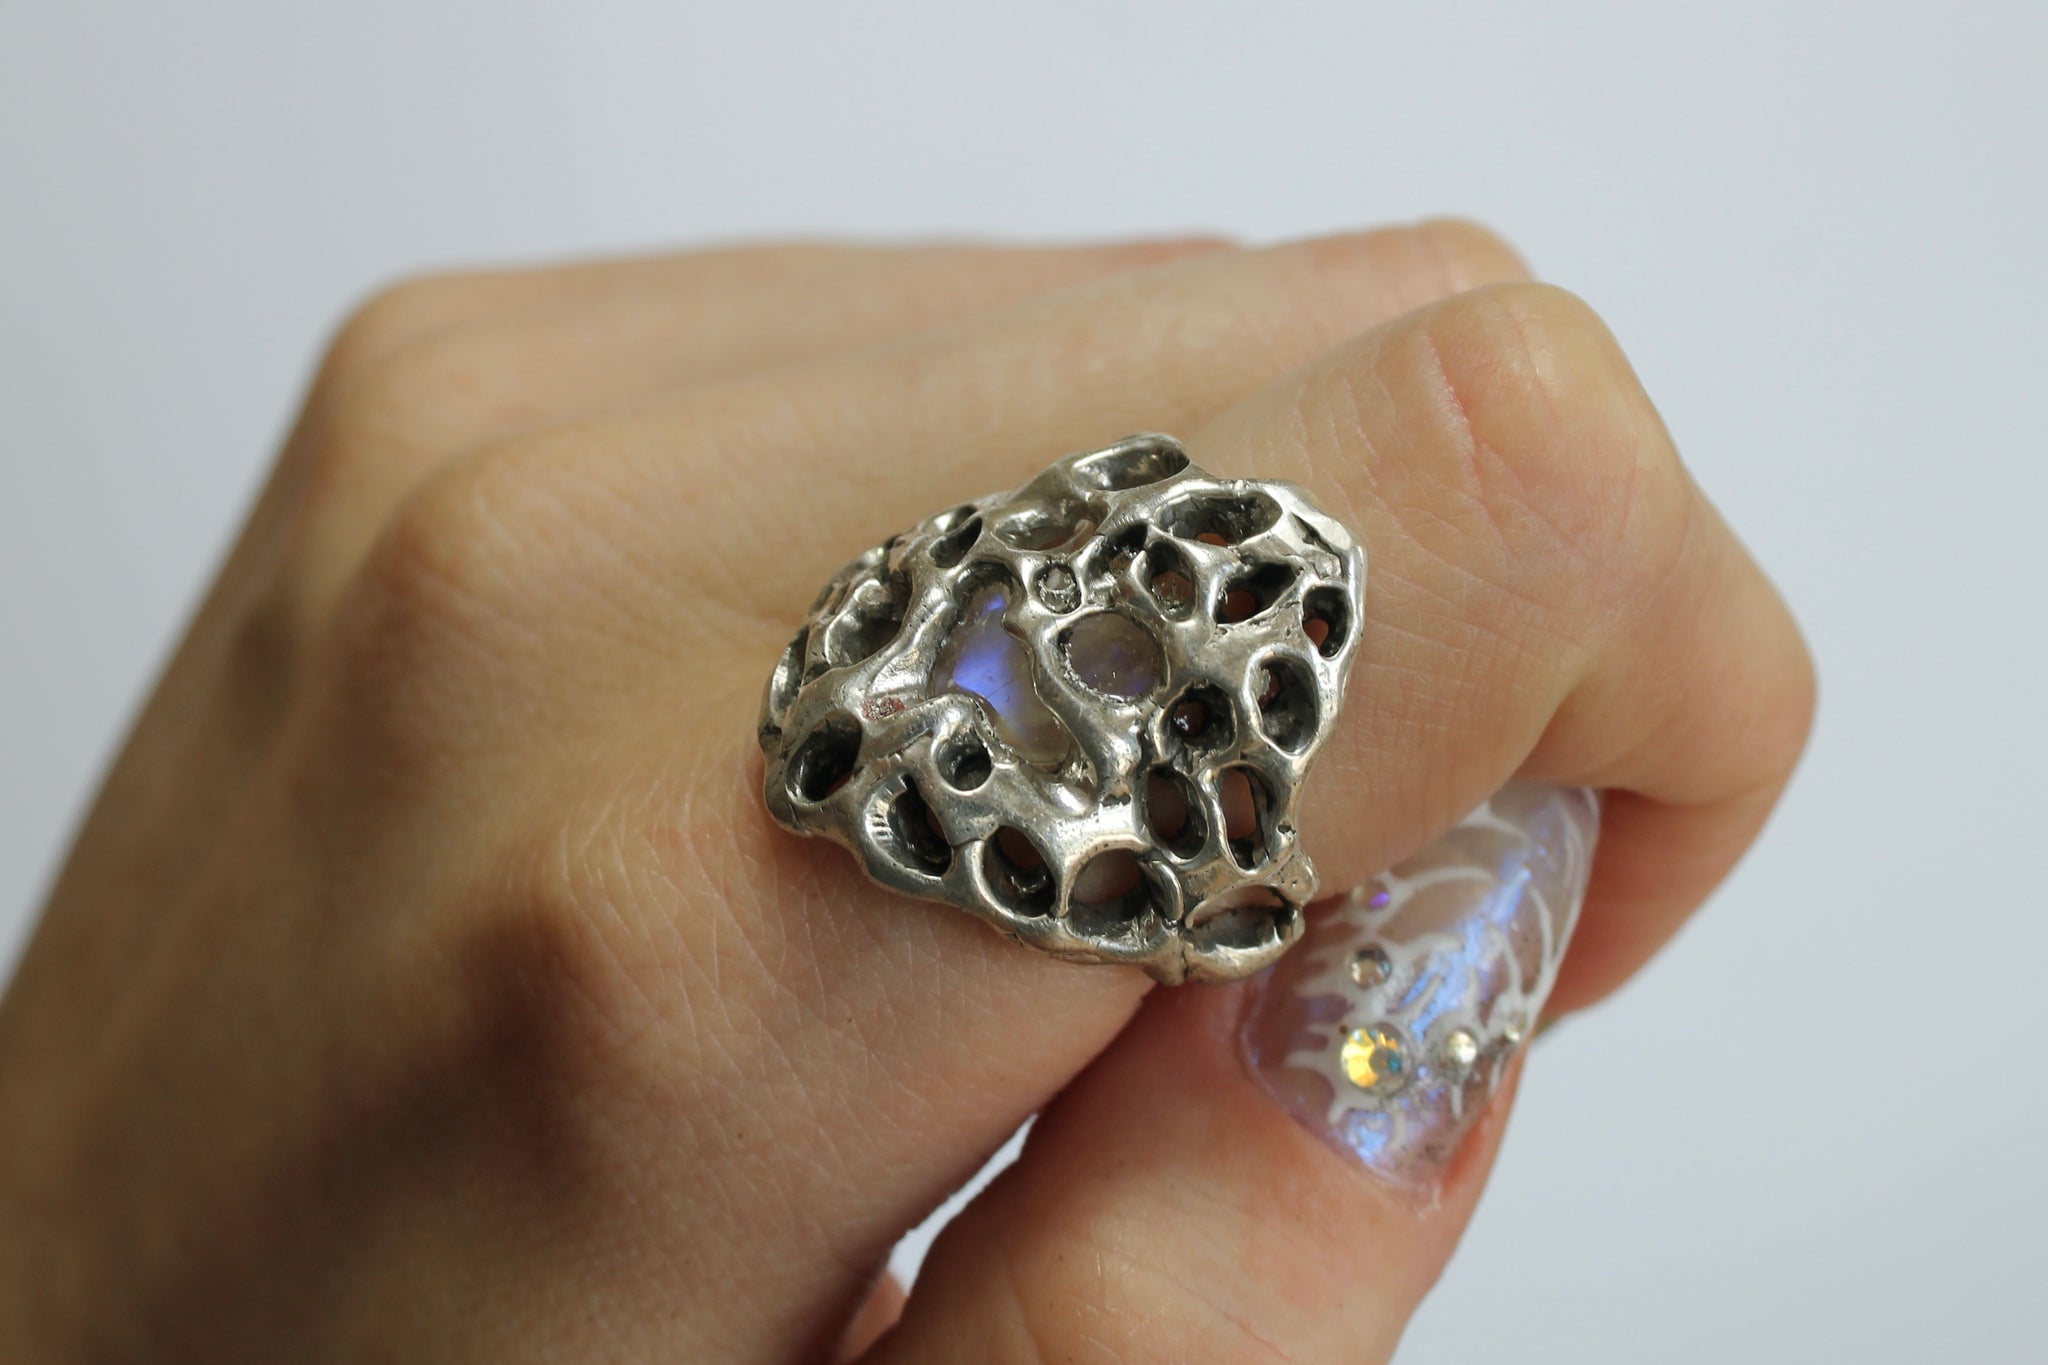 Mold Ring N°2